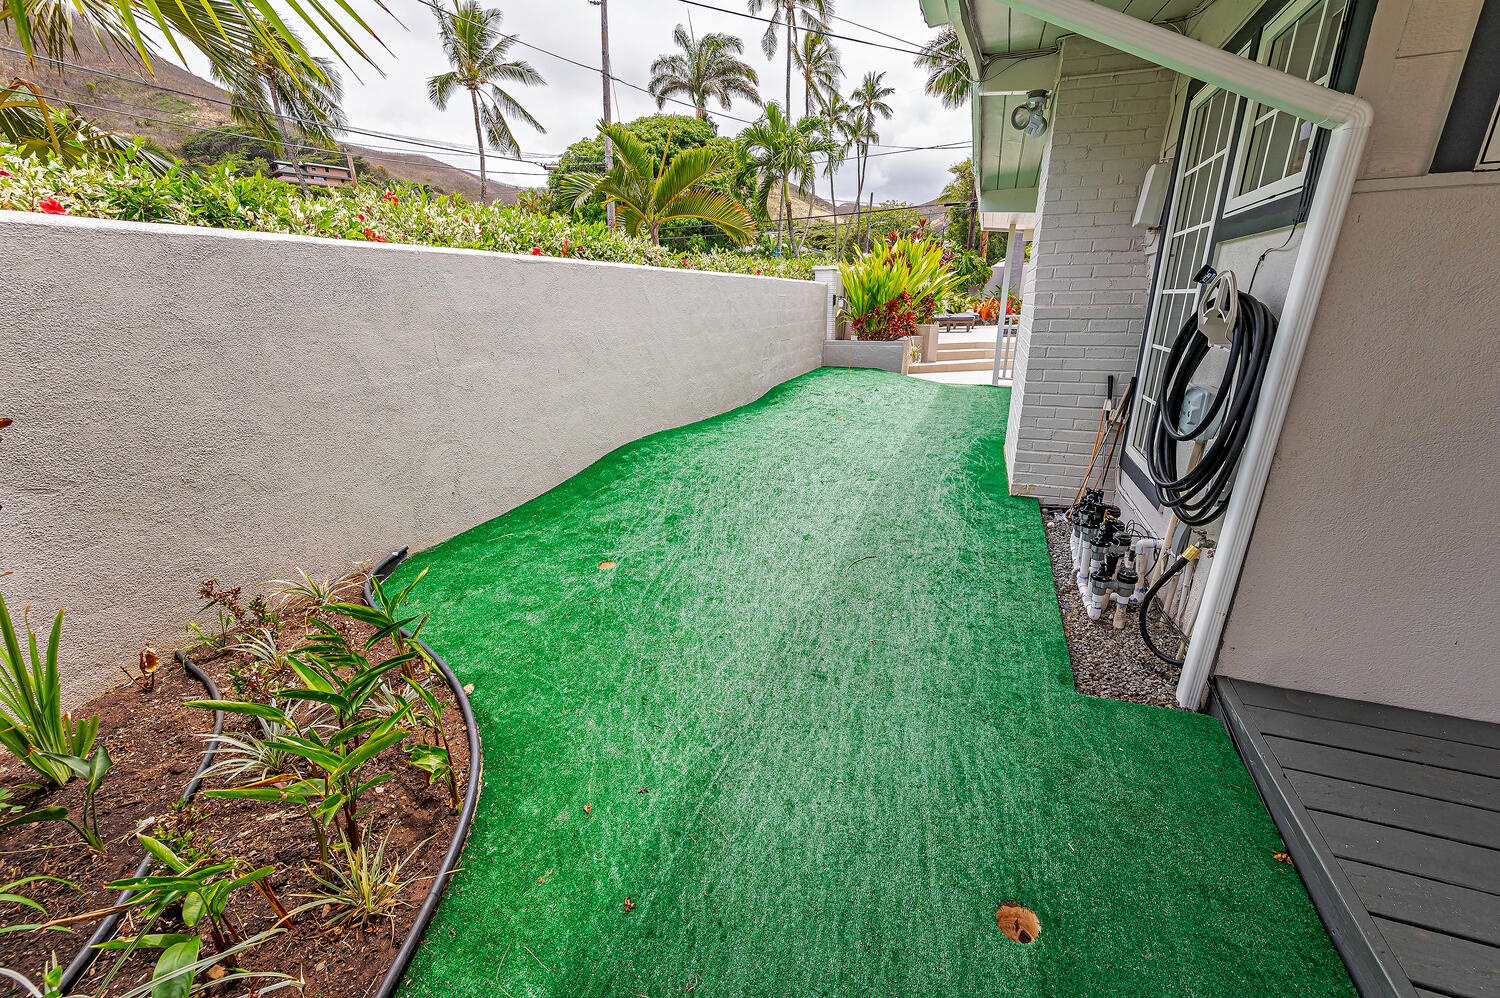 Kailua Vacation Rentals, Villa Hui Hou - Putting green! This property has something for everyone!